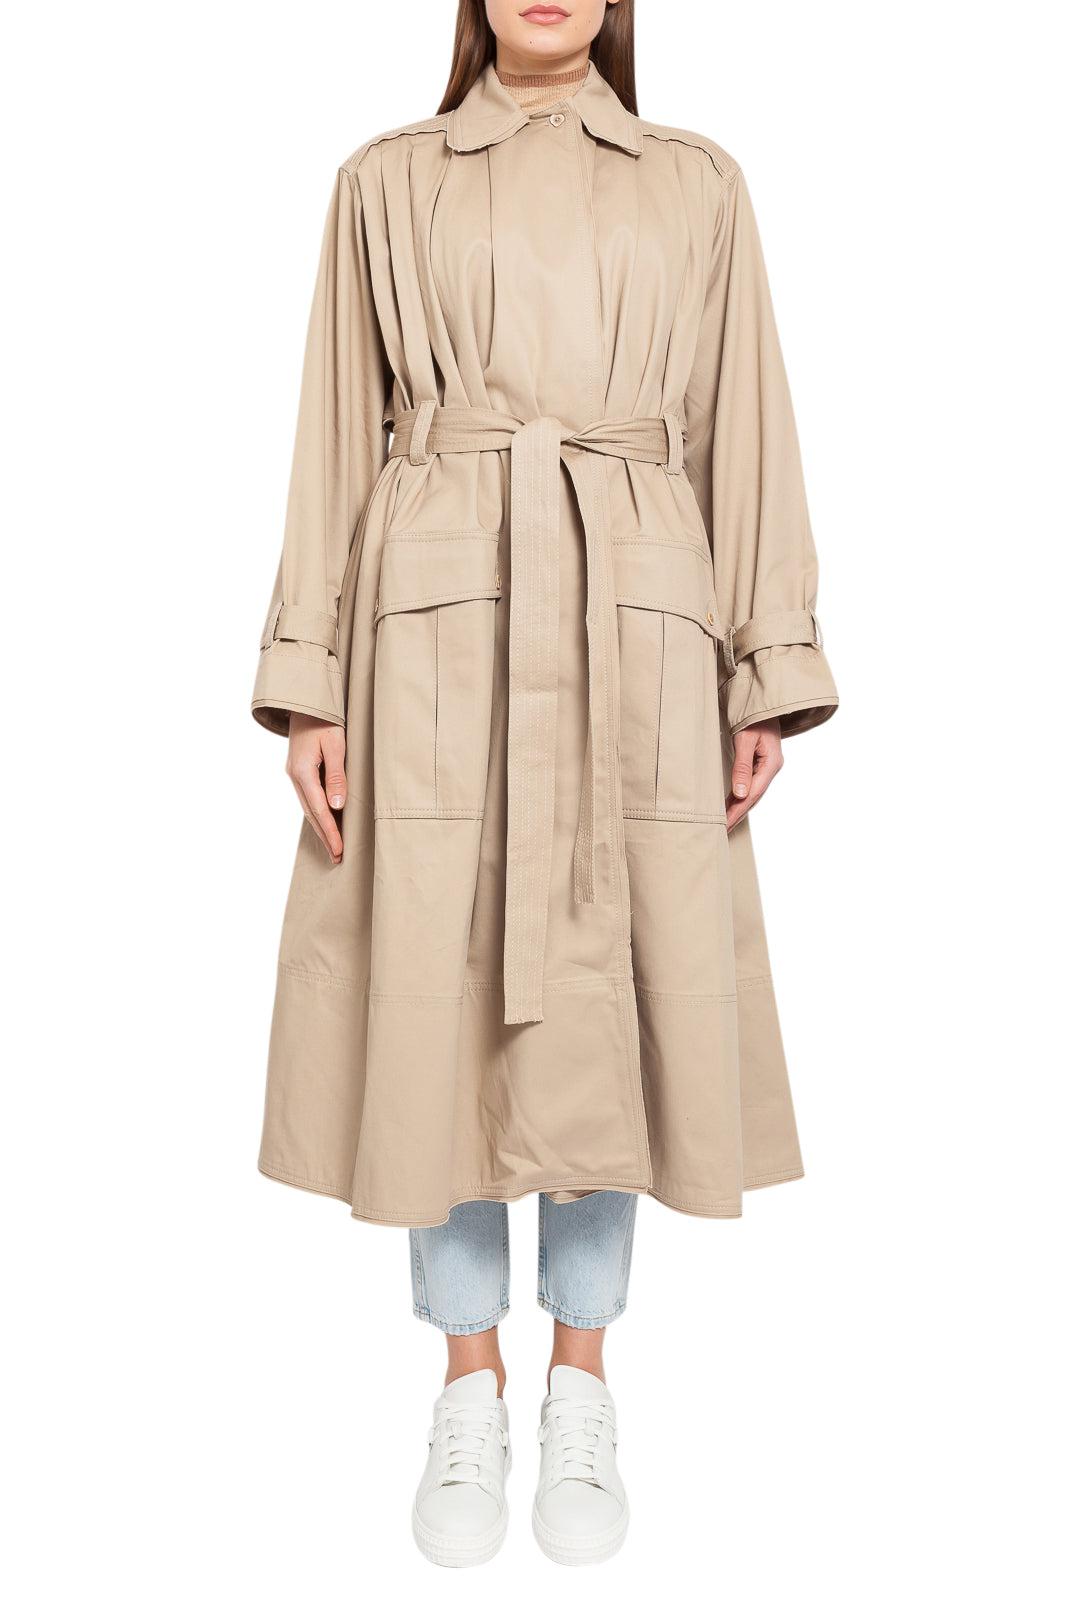 Aje-Flared long trench coat-21AW2014-dgallerystore